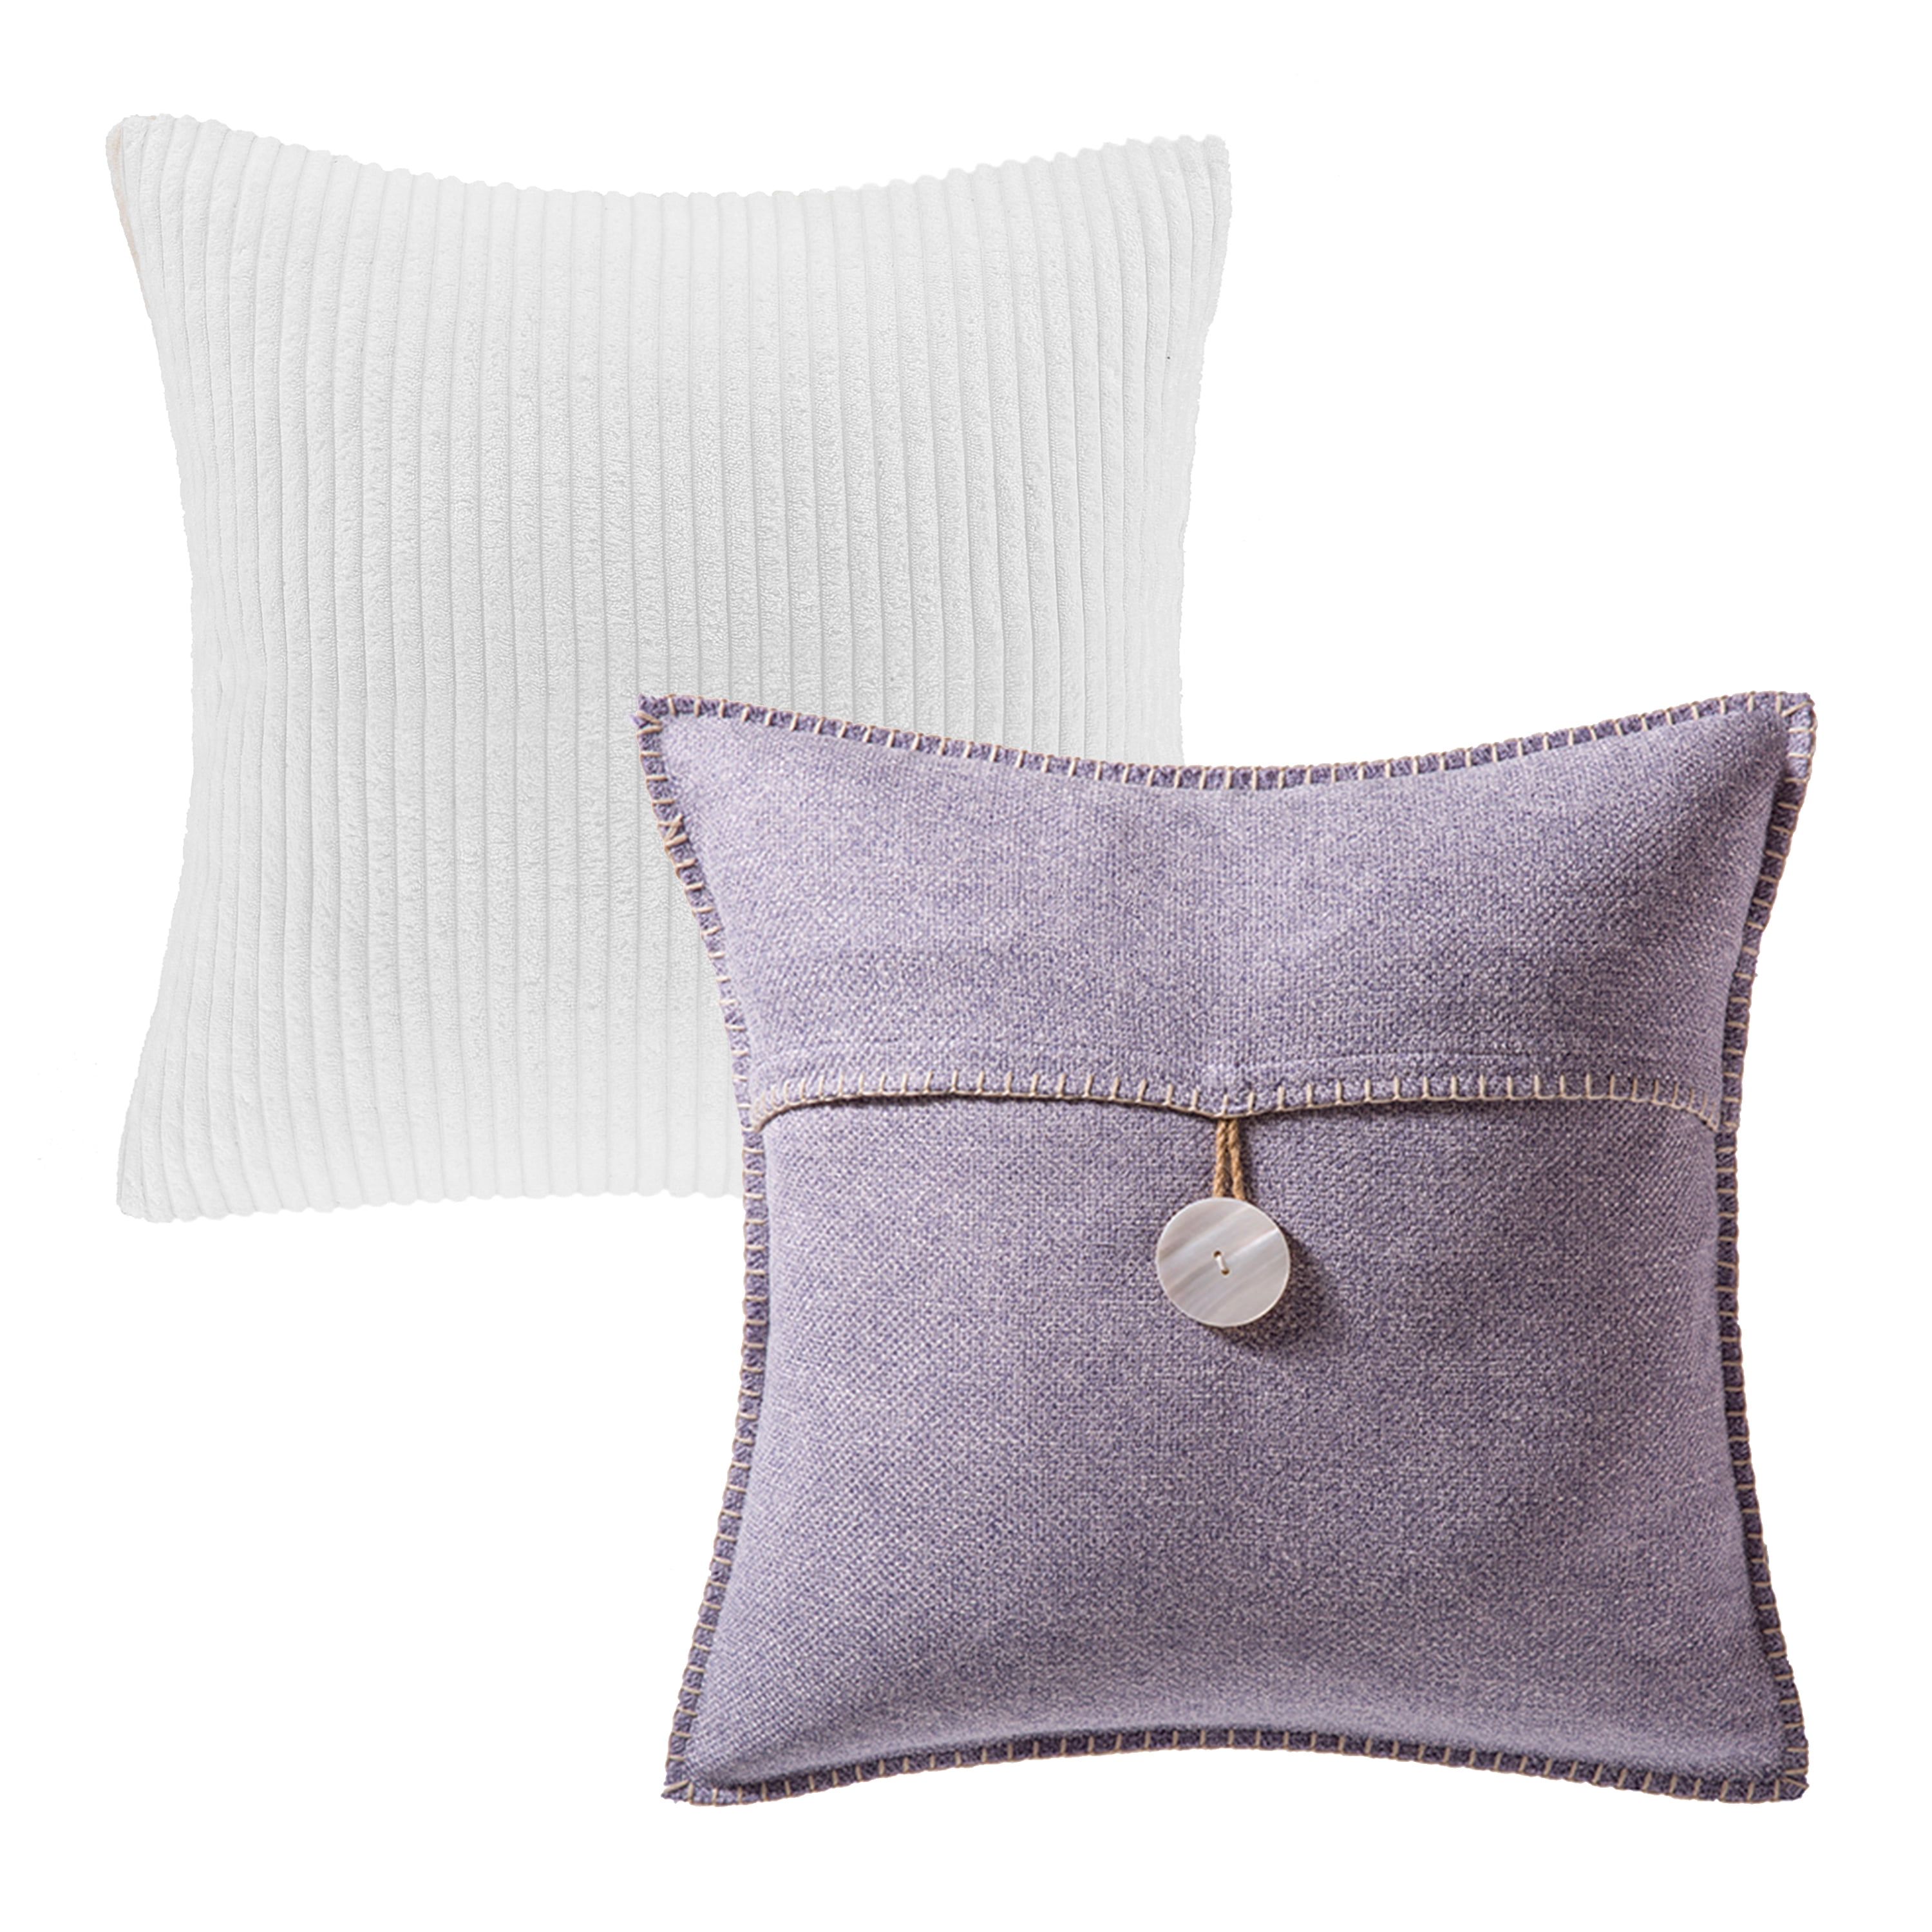 Phantoscope Single Button Series Cotton Blend Farmhouse Square Decorative Throw  Pillow Cusion for Couch, 18 x 18, Light Purple, 2 Pack 